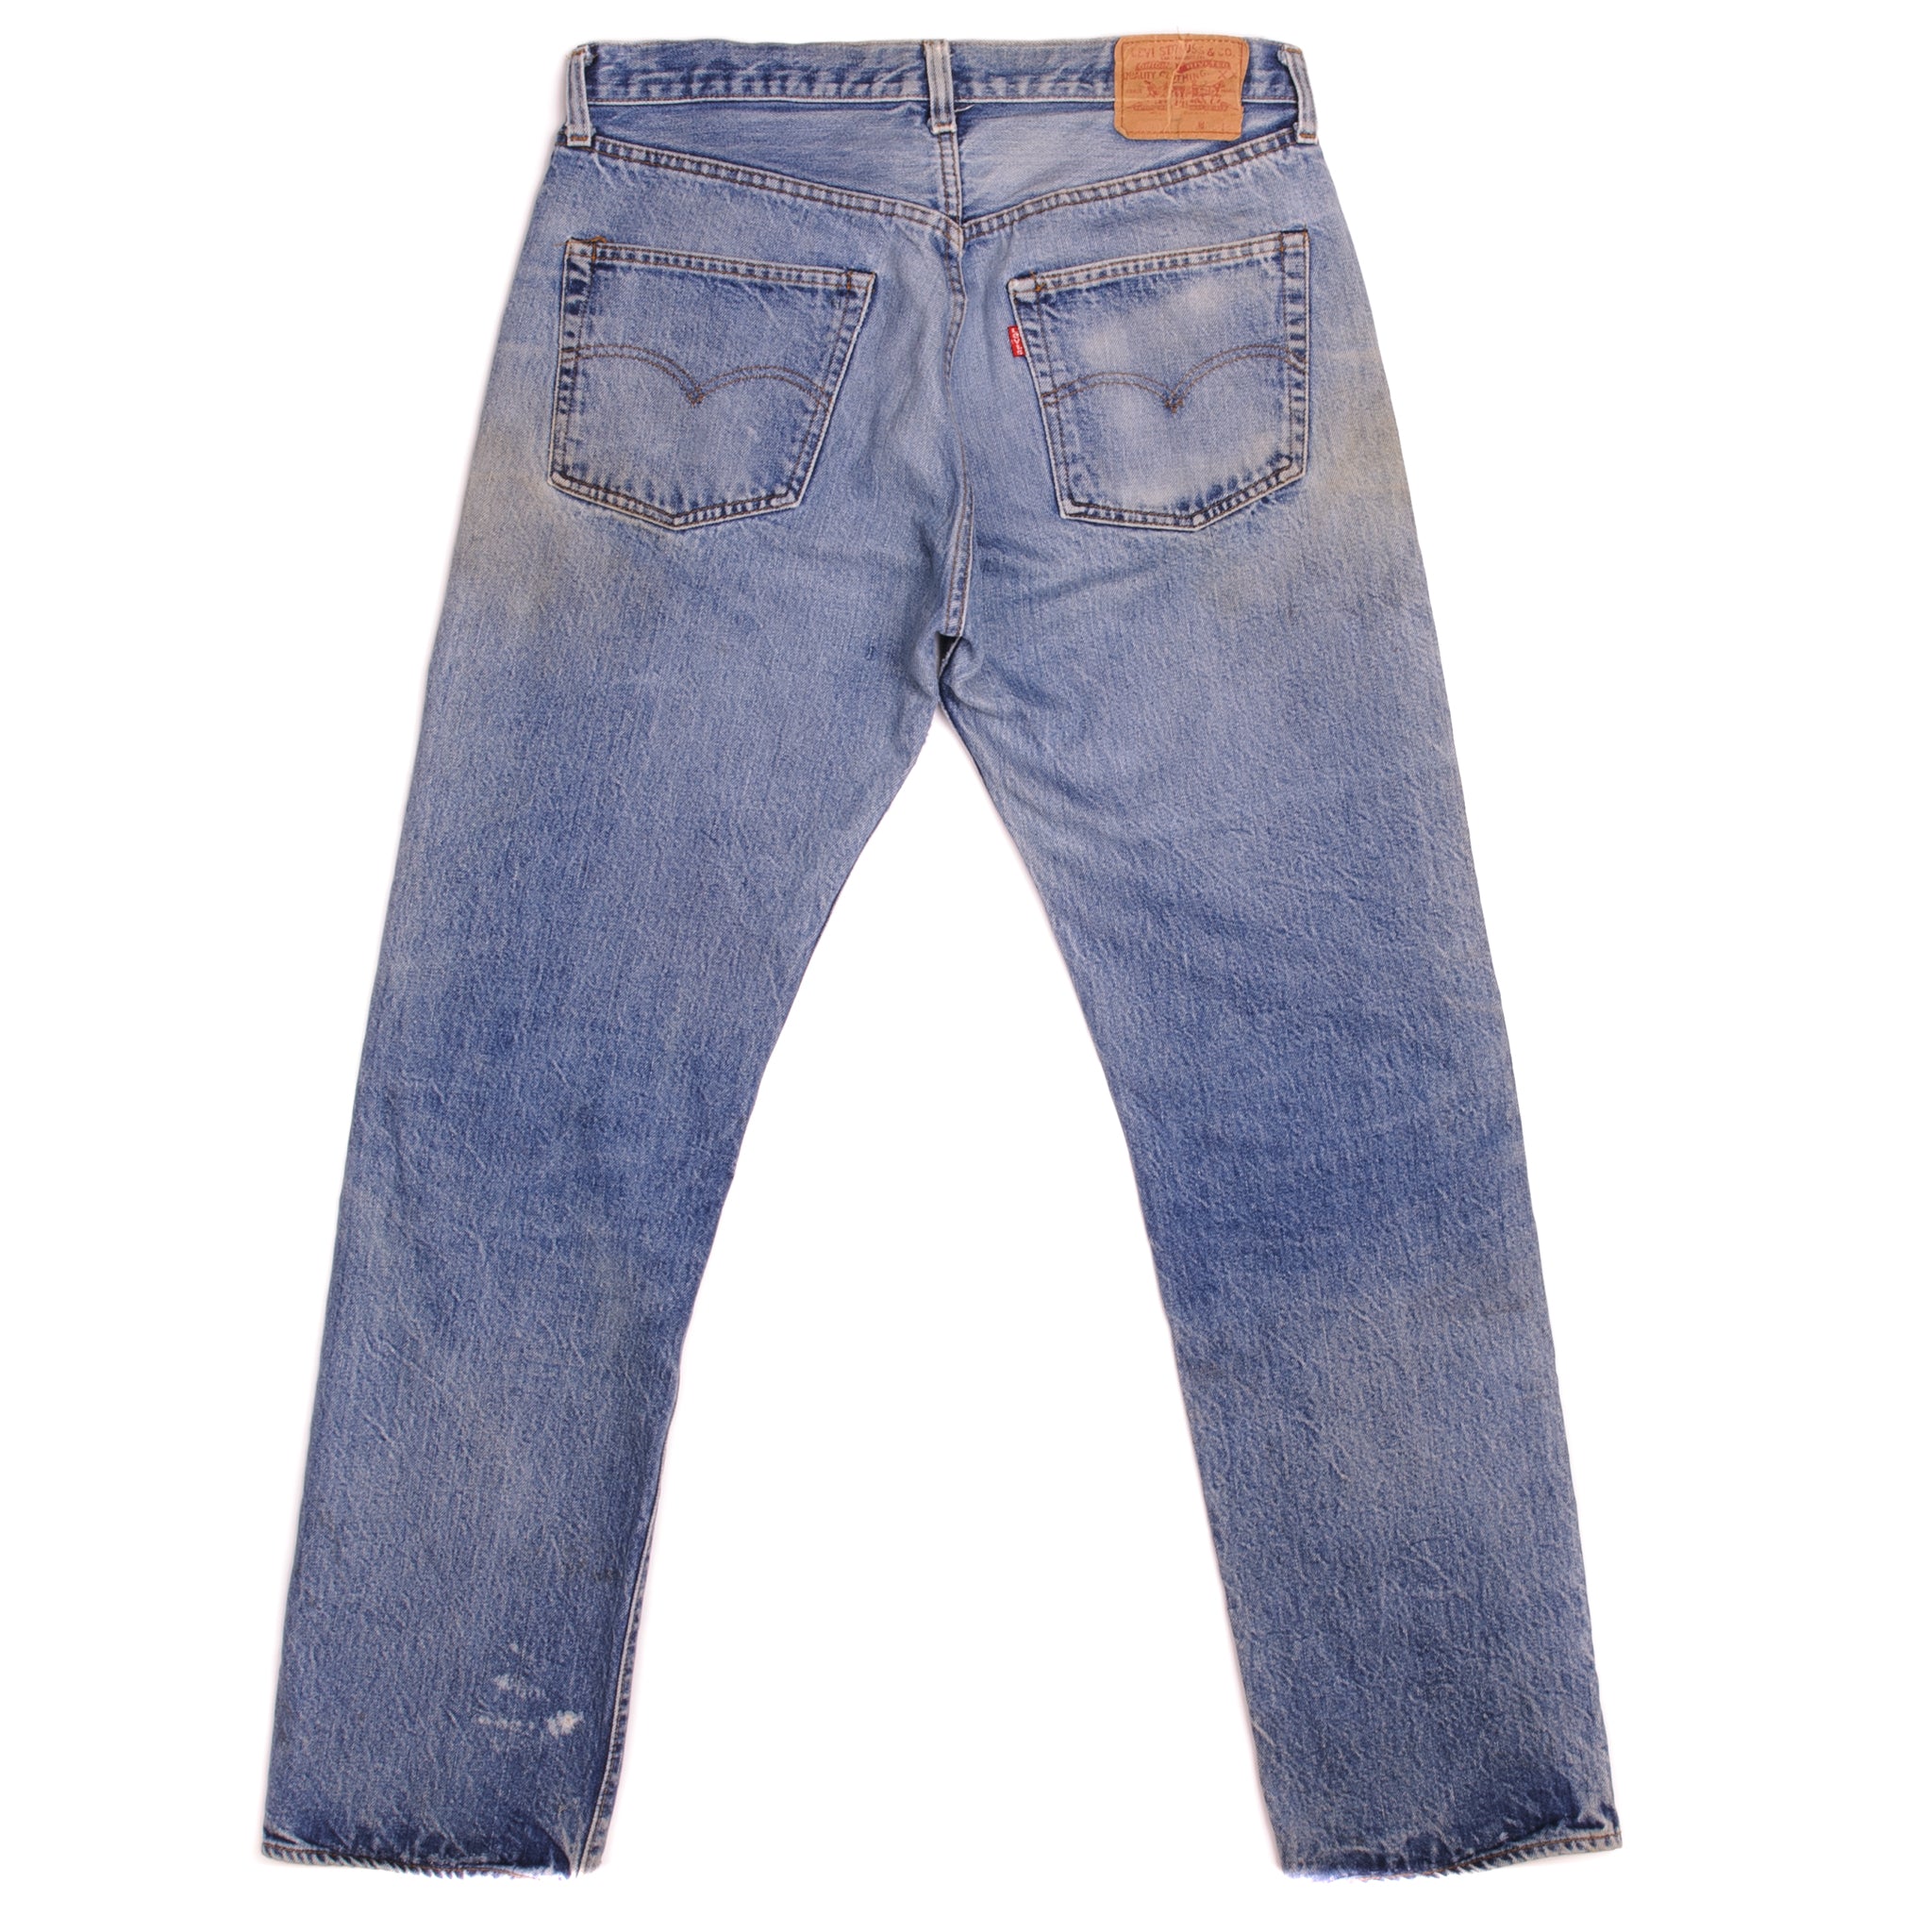 Levi's 501 80s W36 L31 made in USAヴィンテージ-